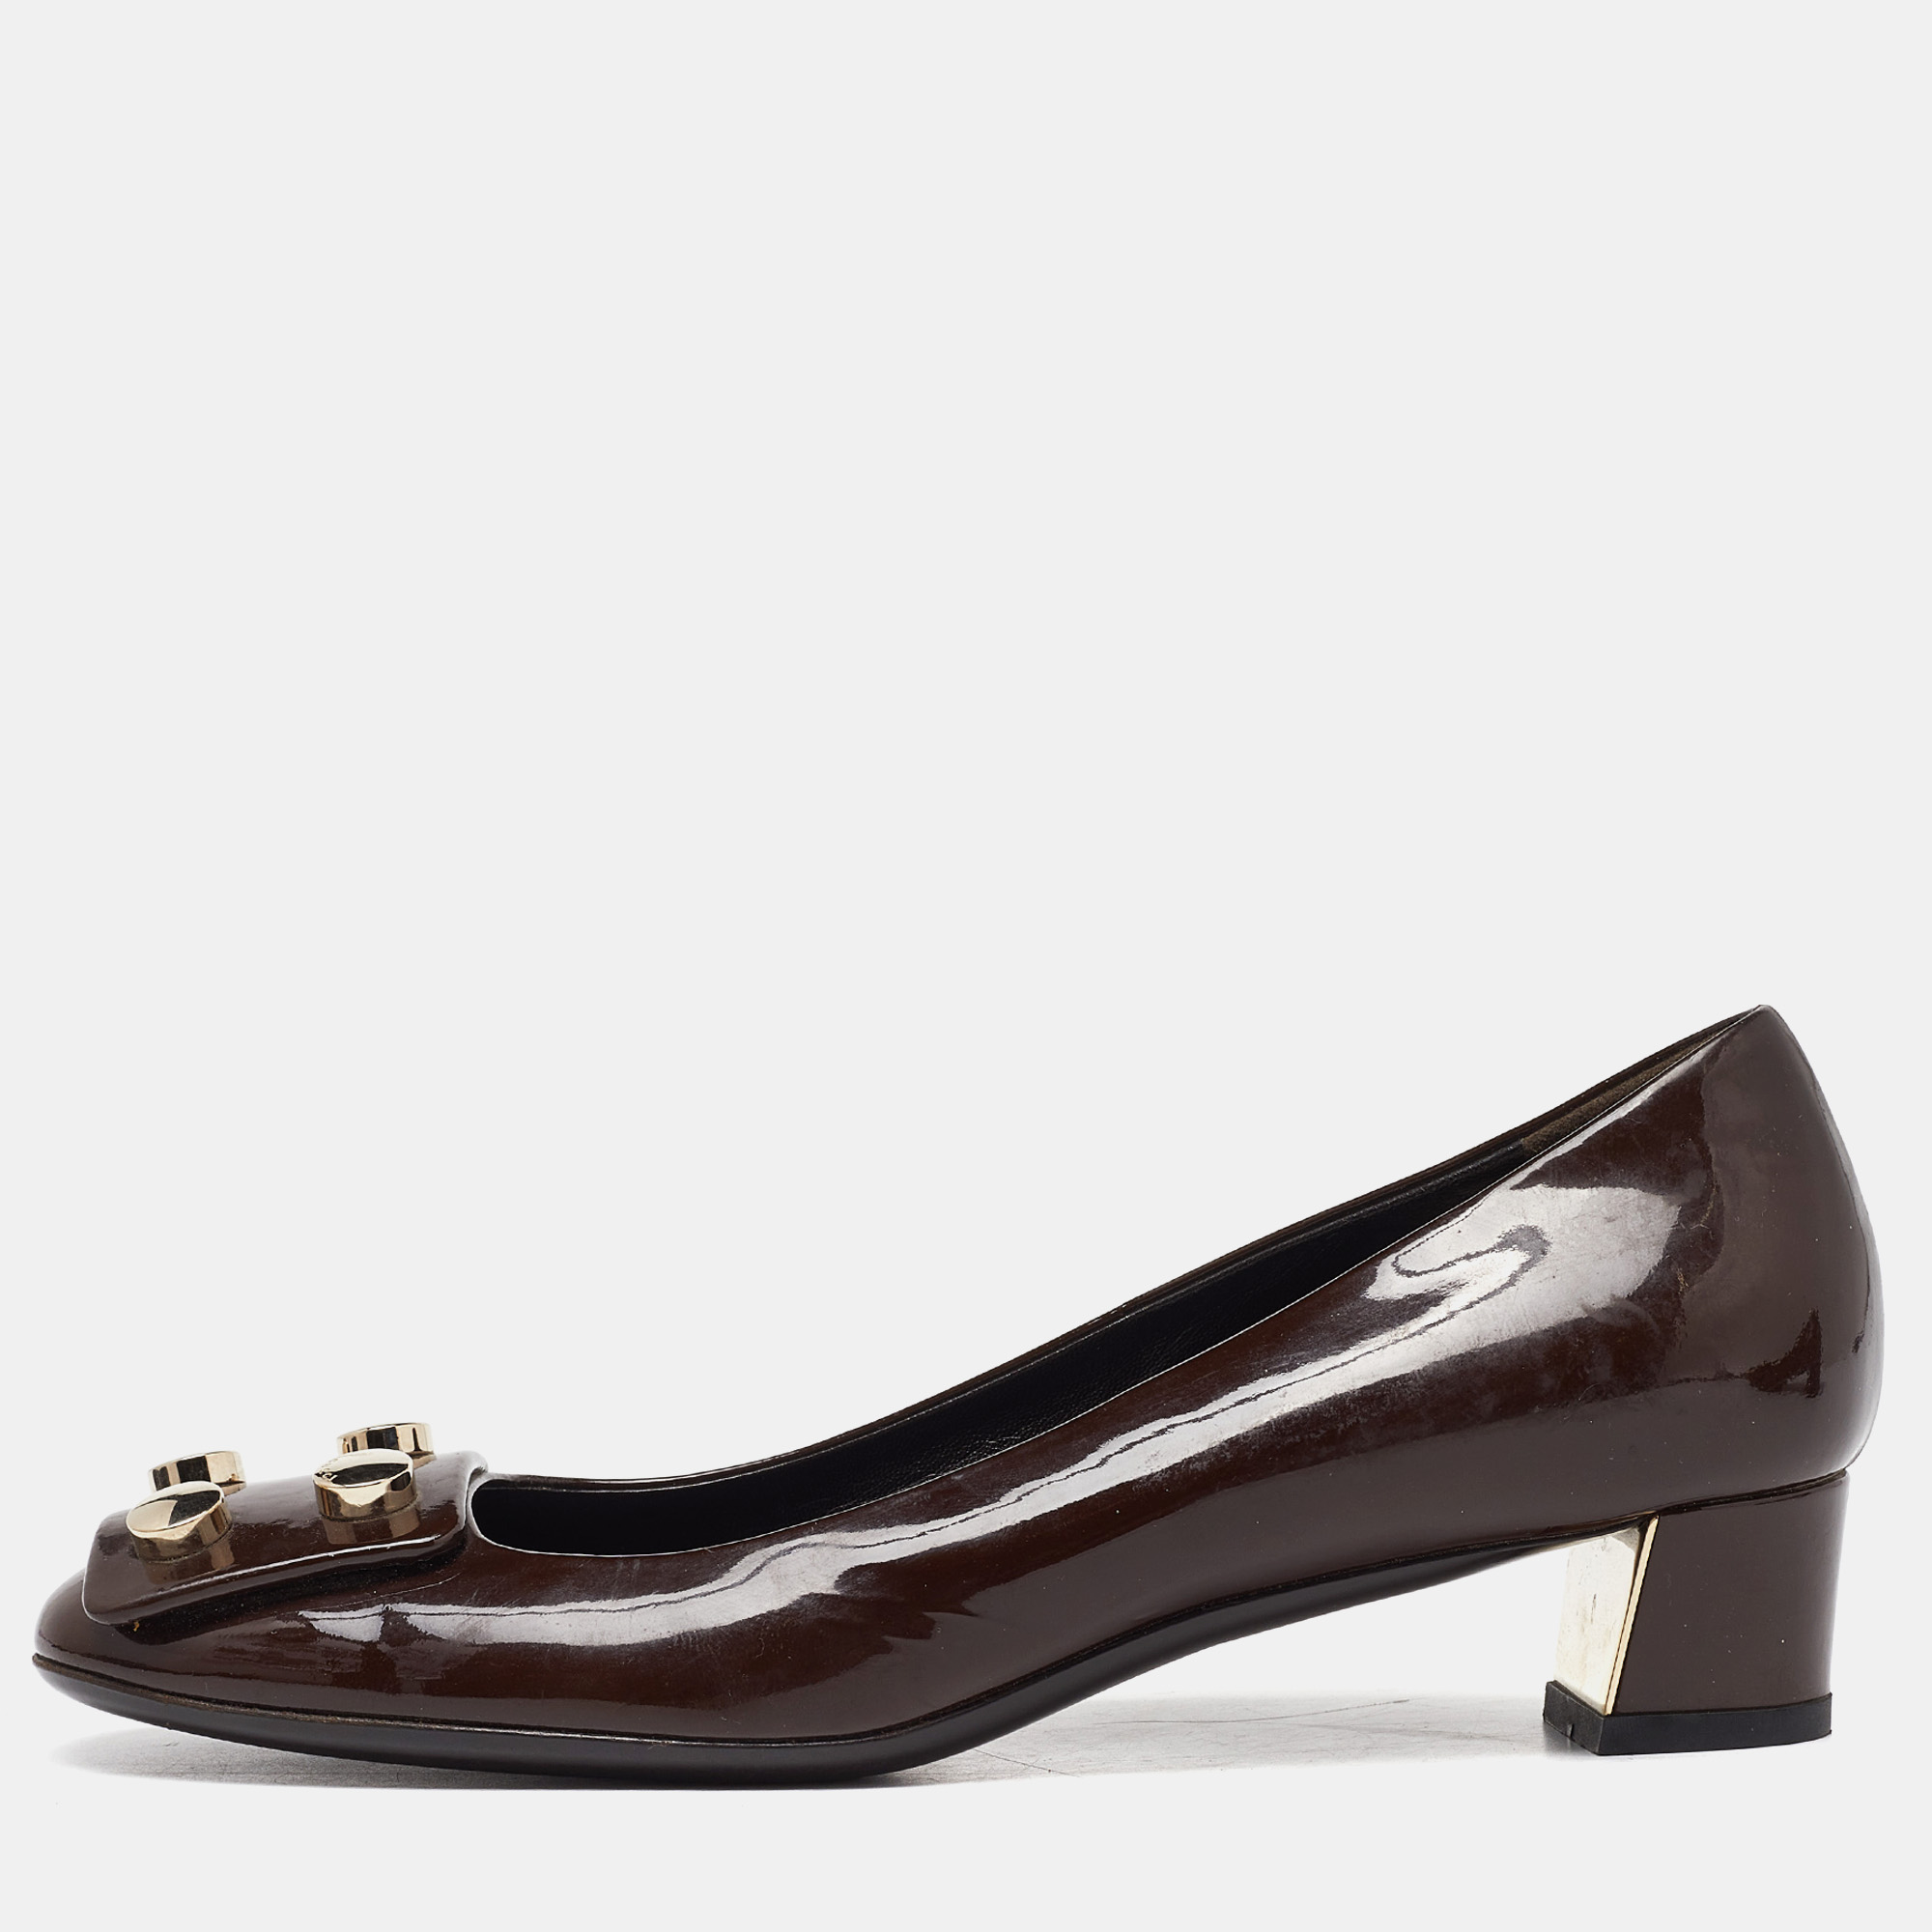 Gucci brown patent leather block heel pumps size 35.5